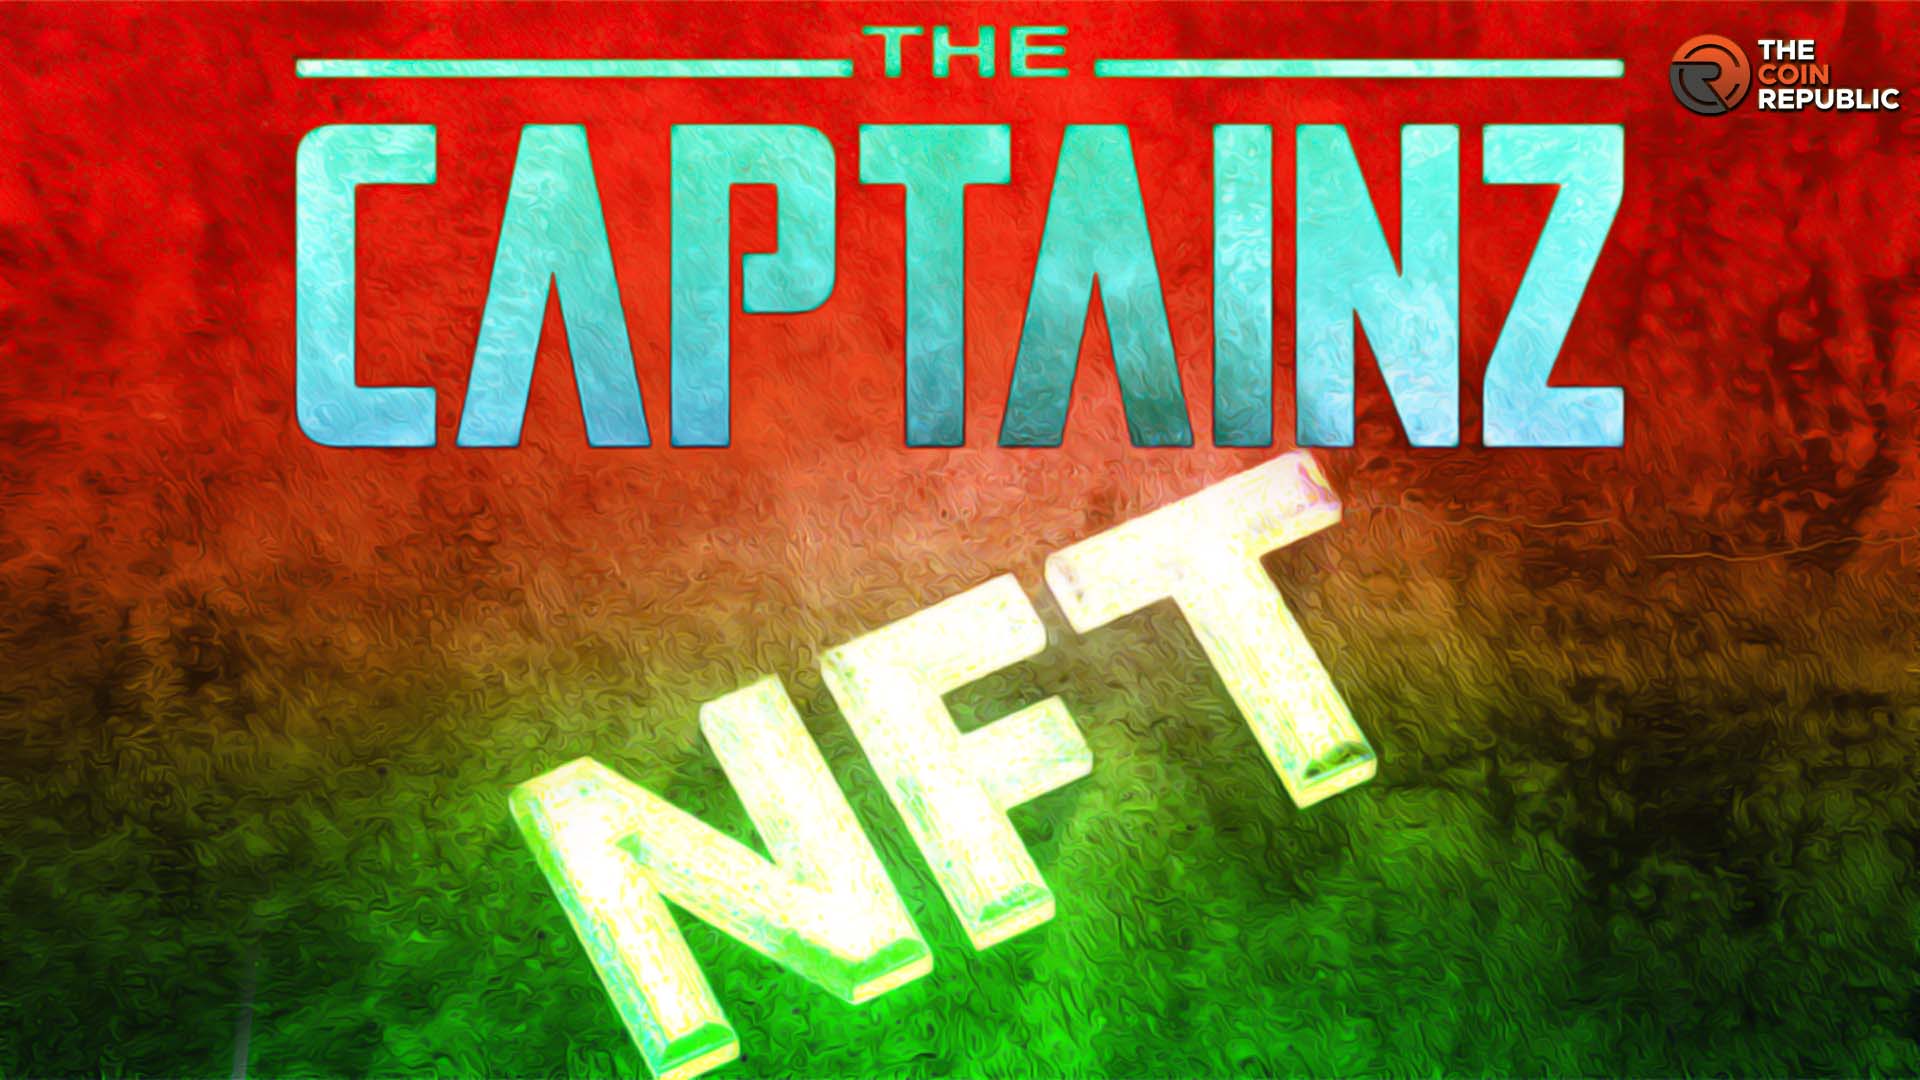 The Captainz NFT: Pirate Inspired NFT To Explore and Indulge